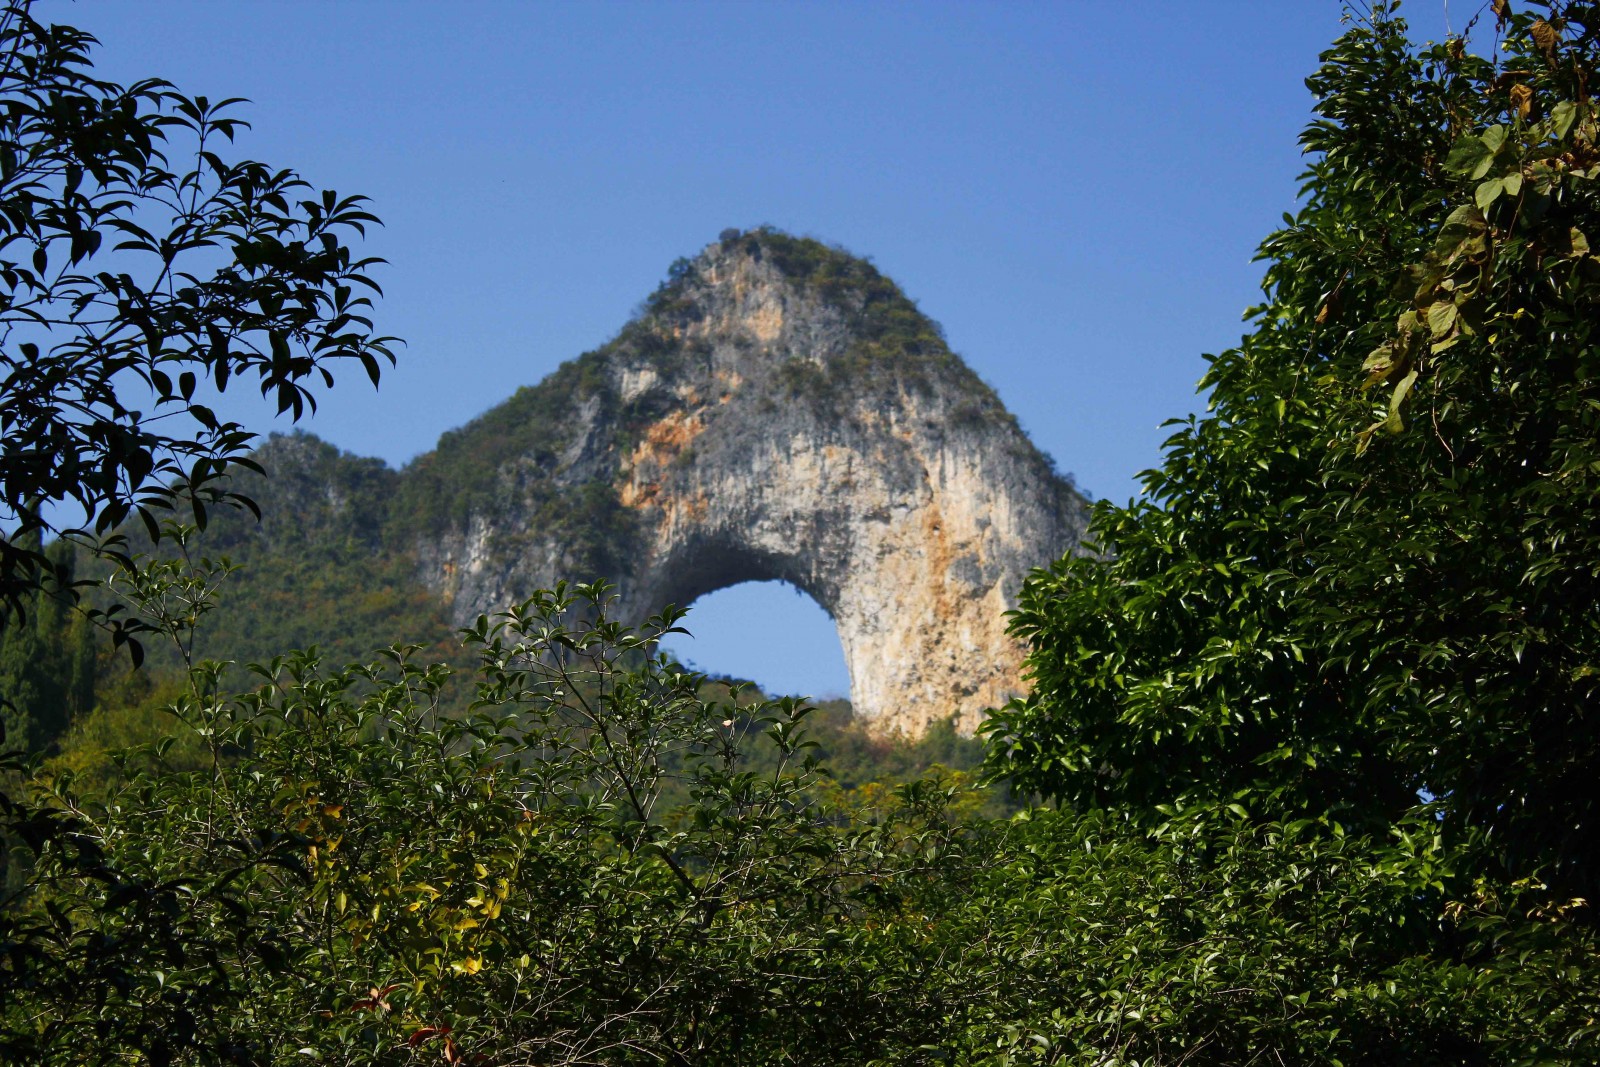 Moon hill, Yangshuo, China, Supplier Photo (PureQuest)